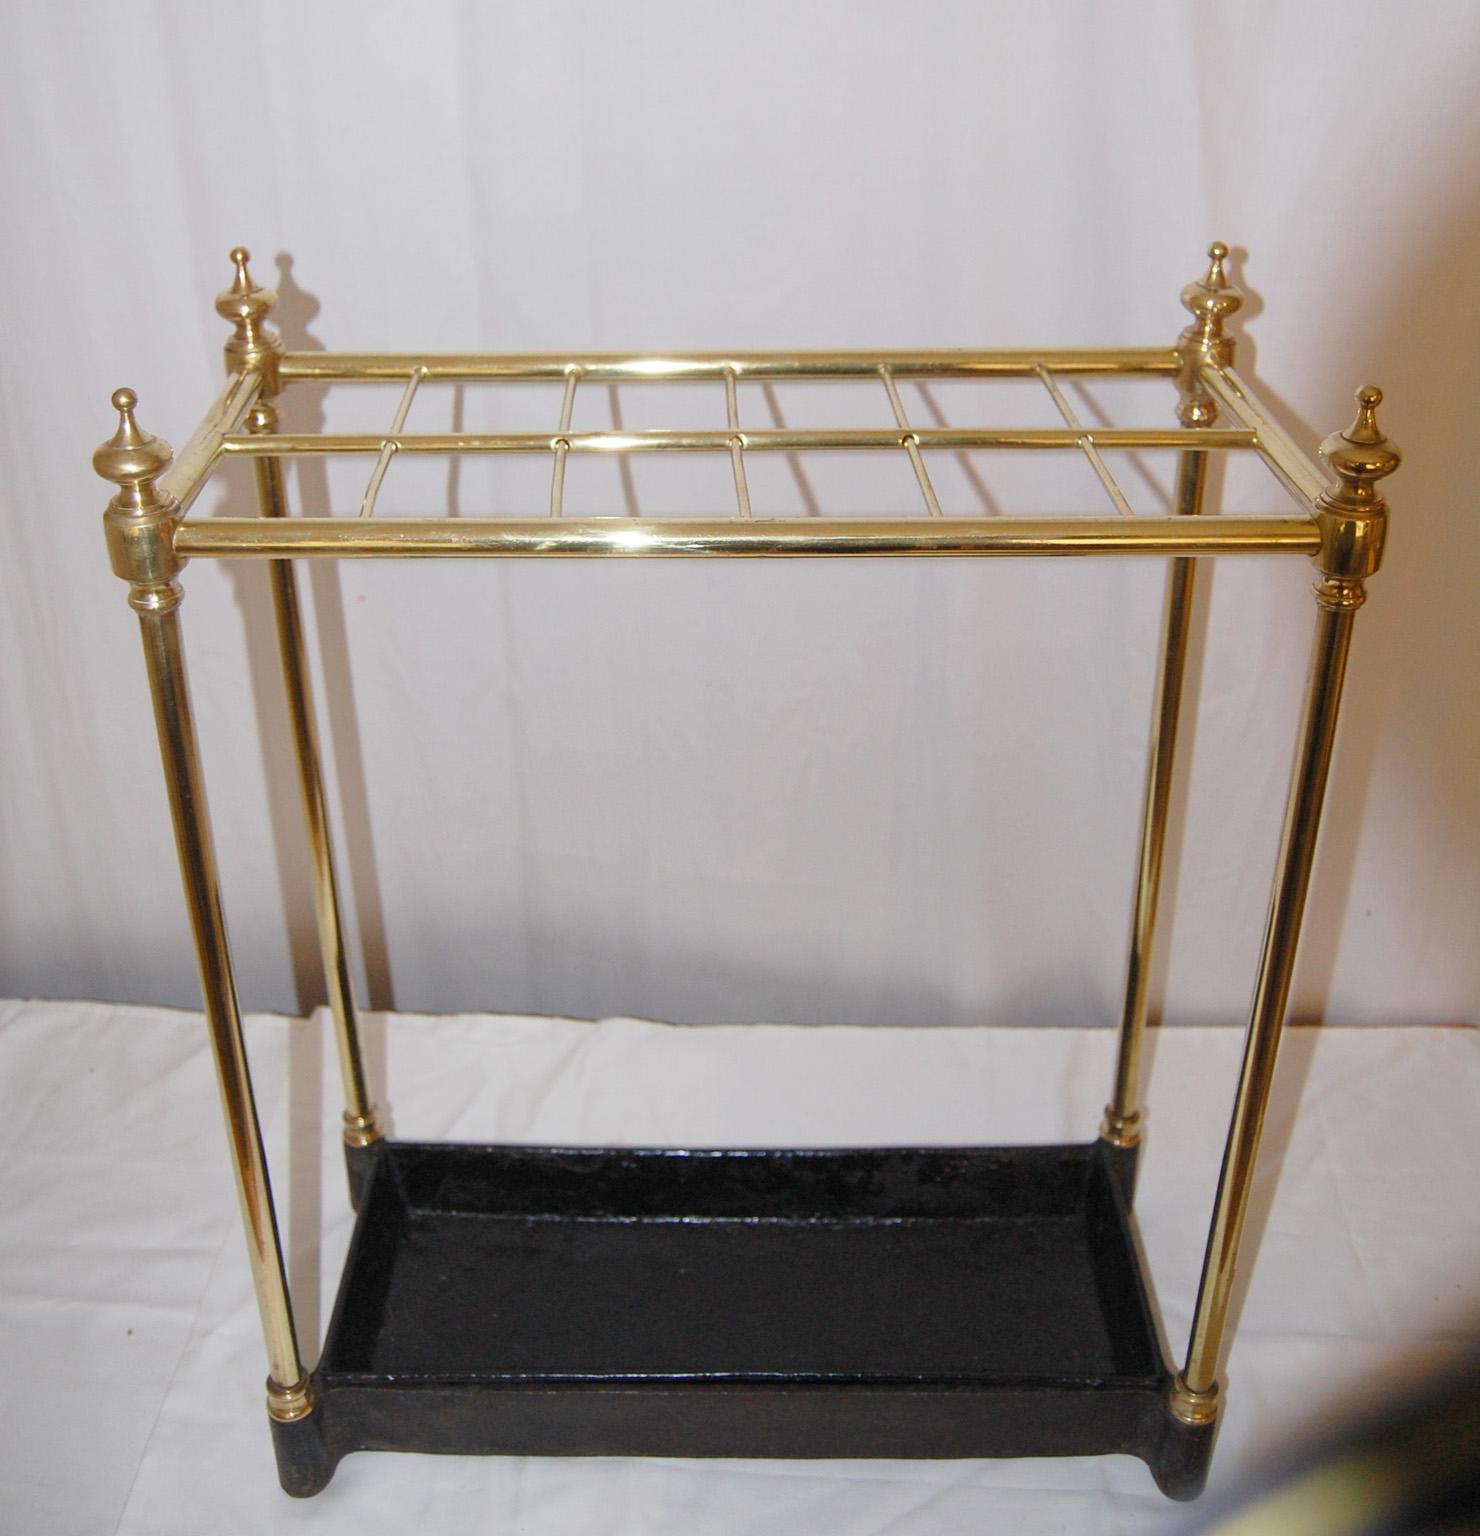 Early 20th Century English Edwardian Brass and Iron Umbrella Stand or Walking Stick Stand For Sale